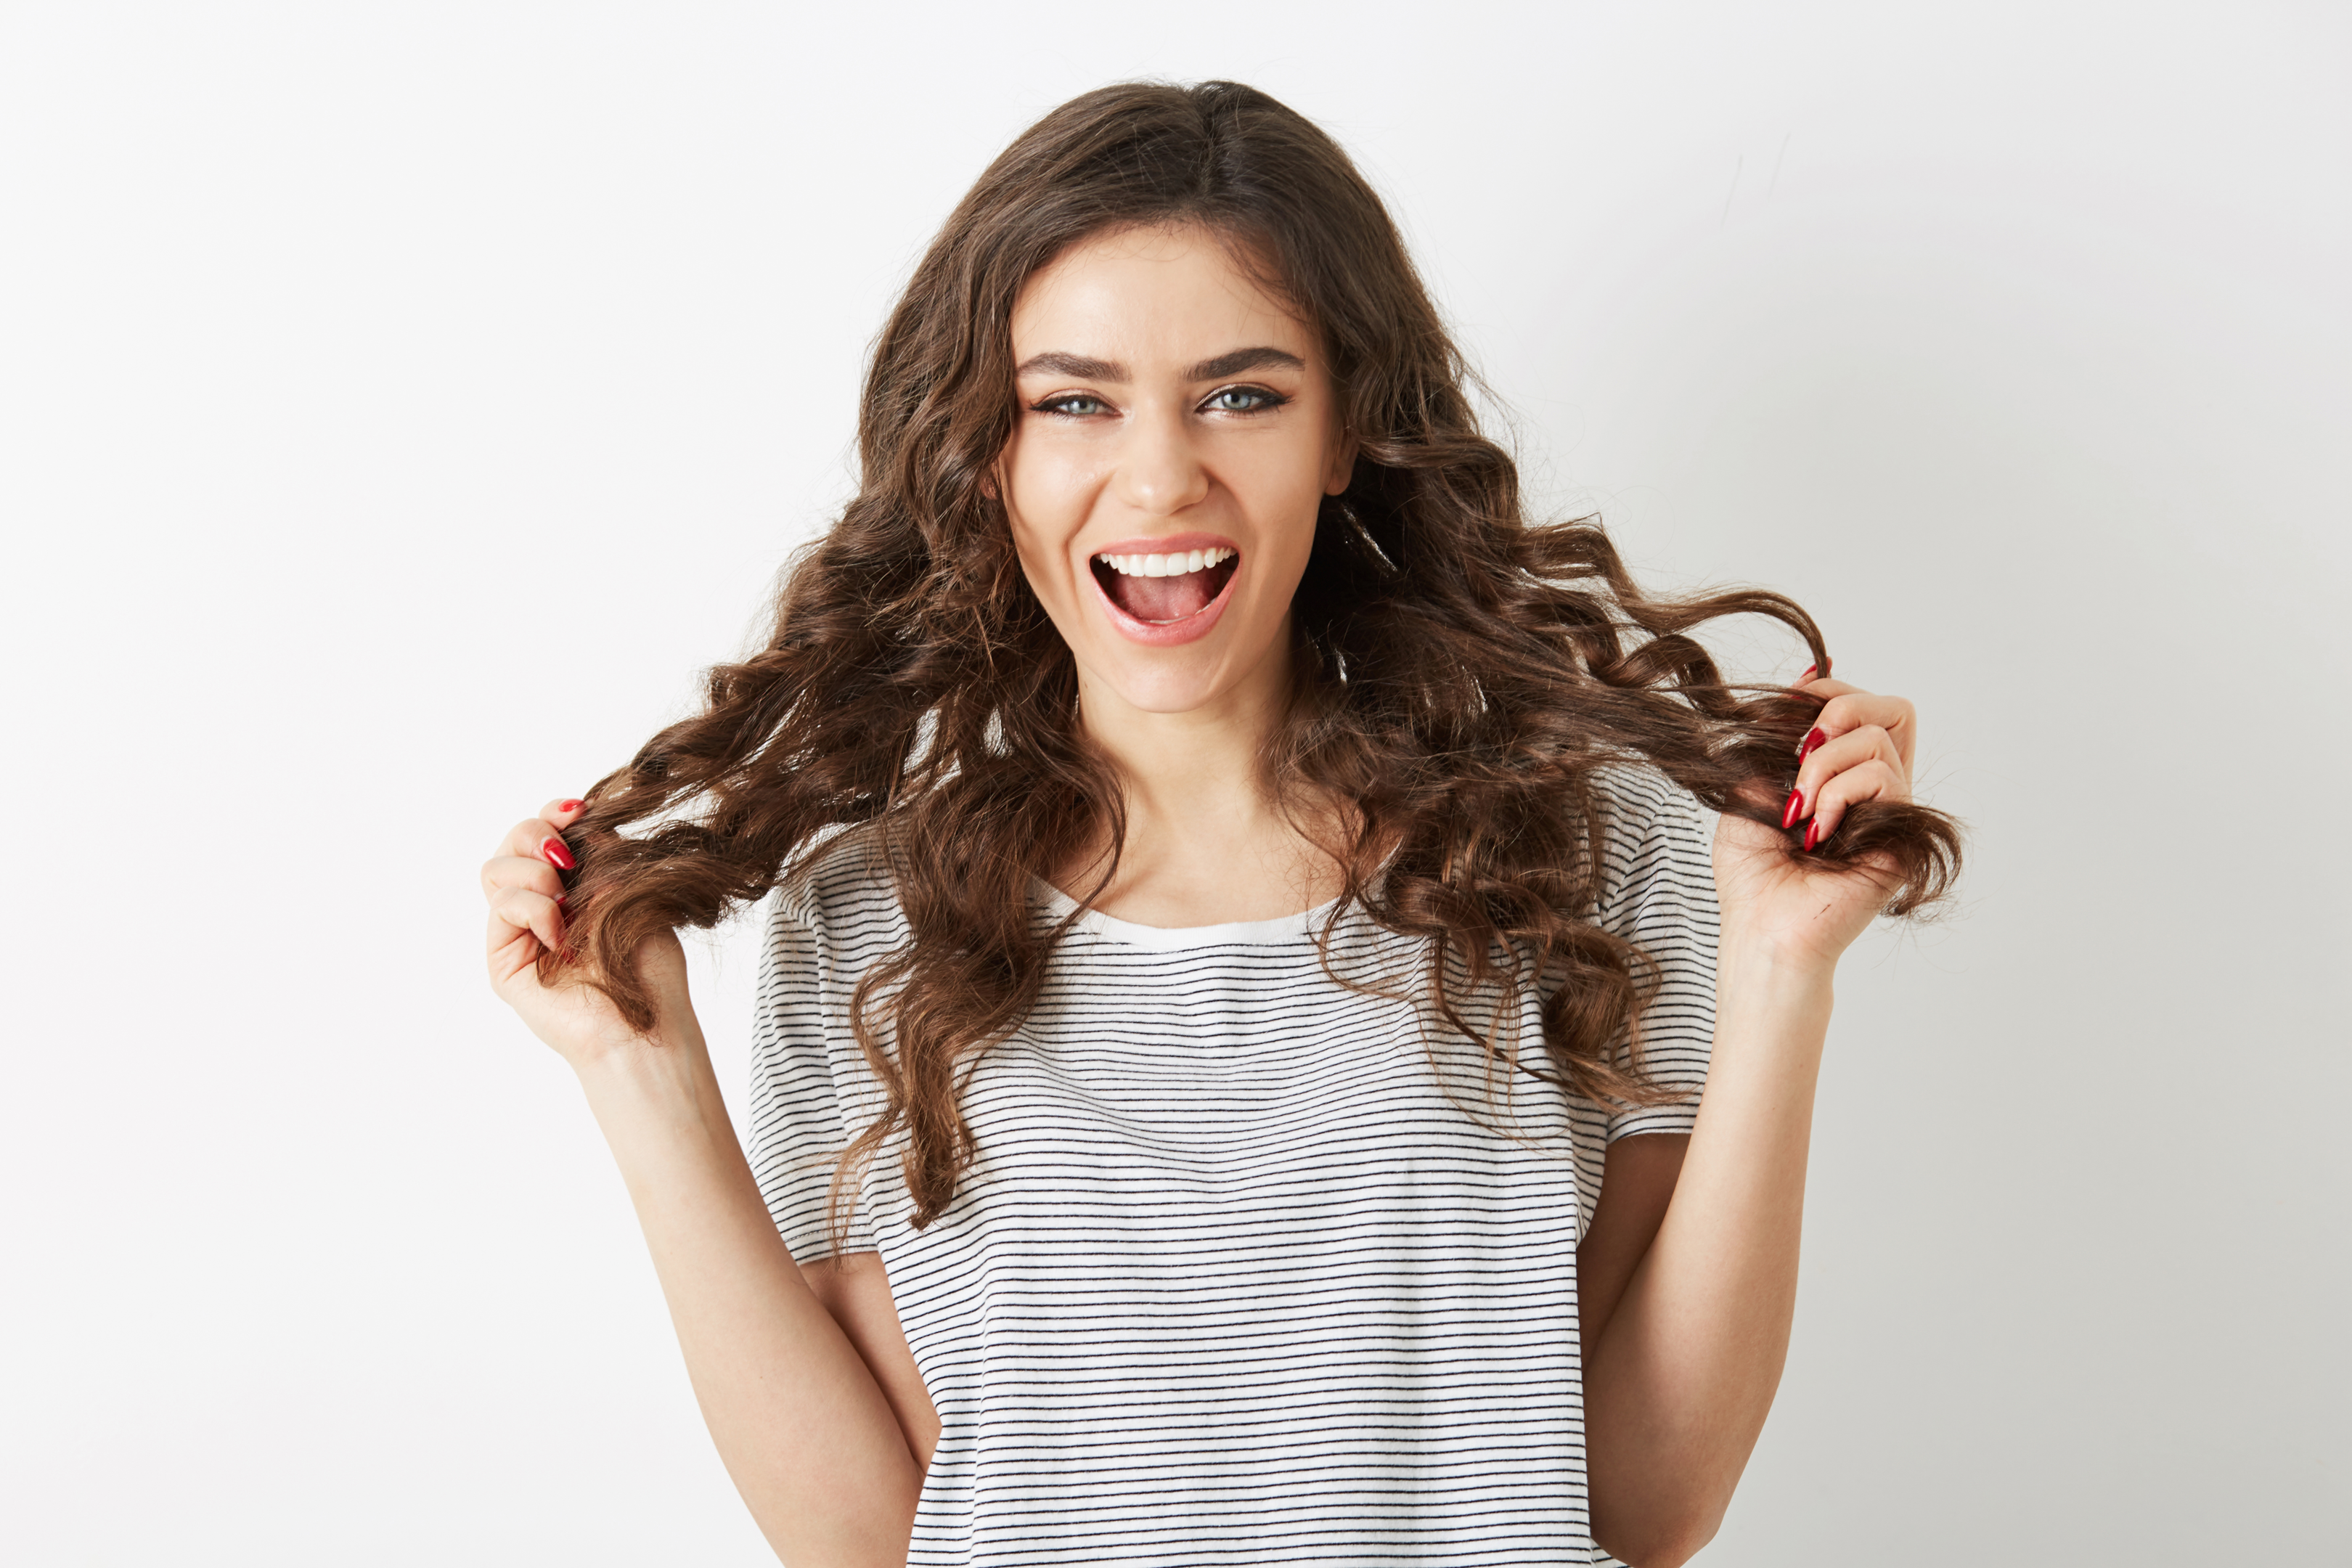 A young girl with beautiful and healthy hair.